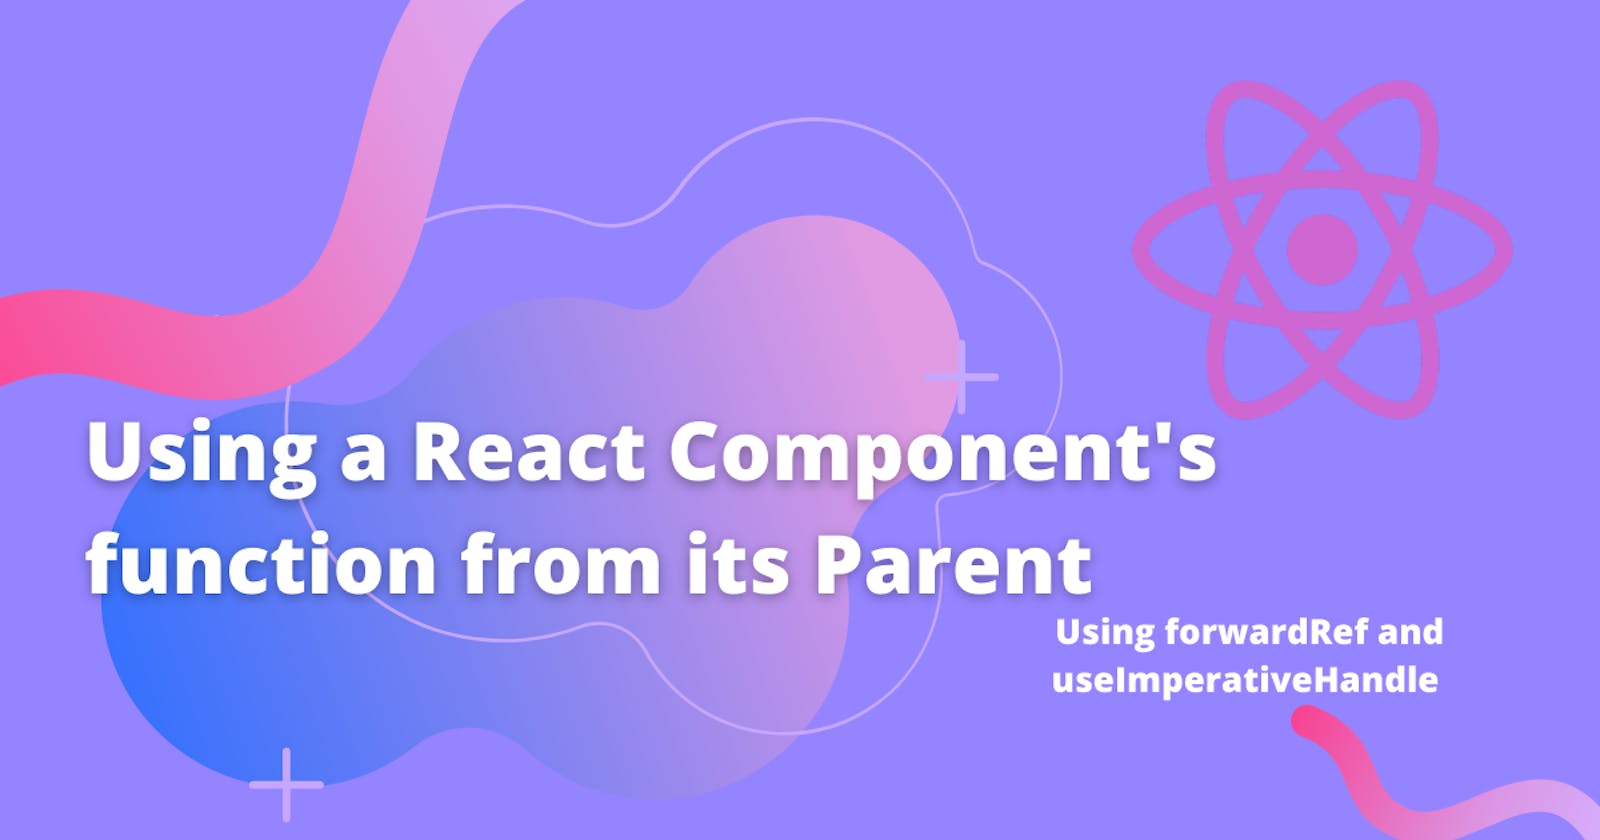 Using a React Component's function from its Parent